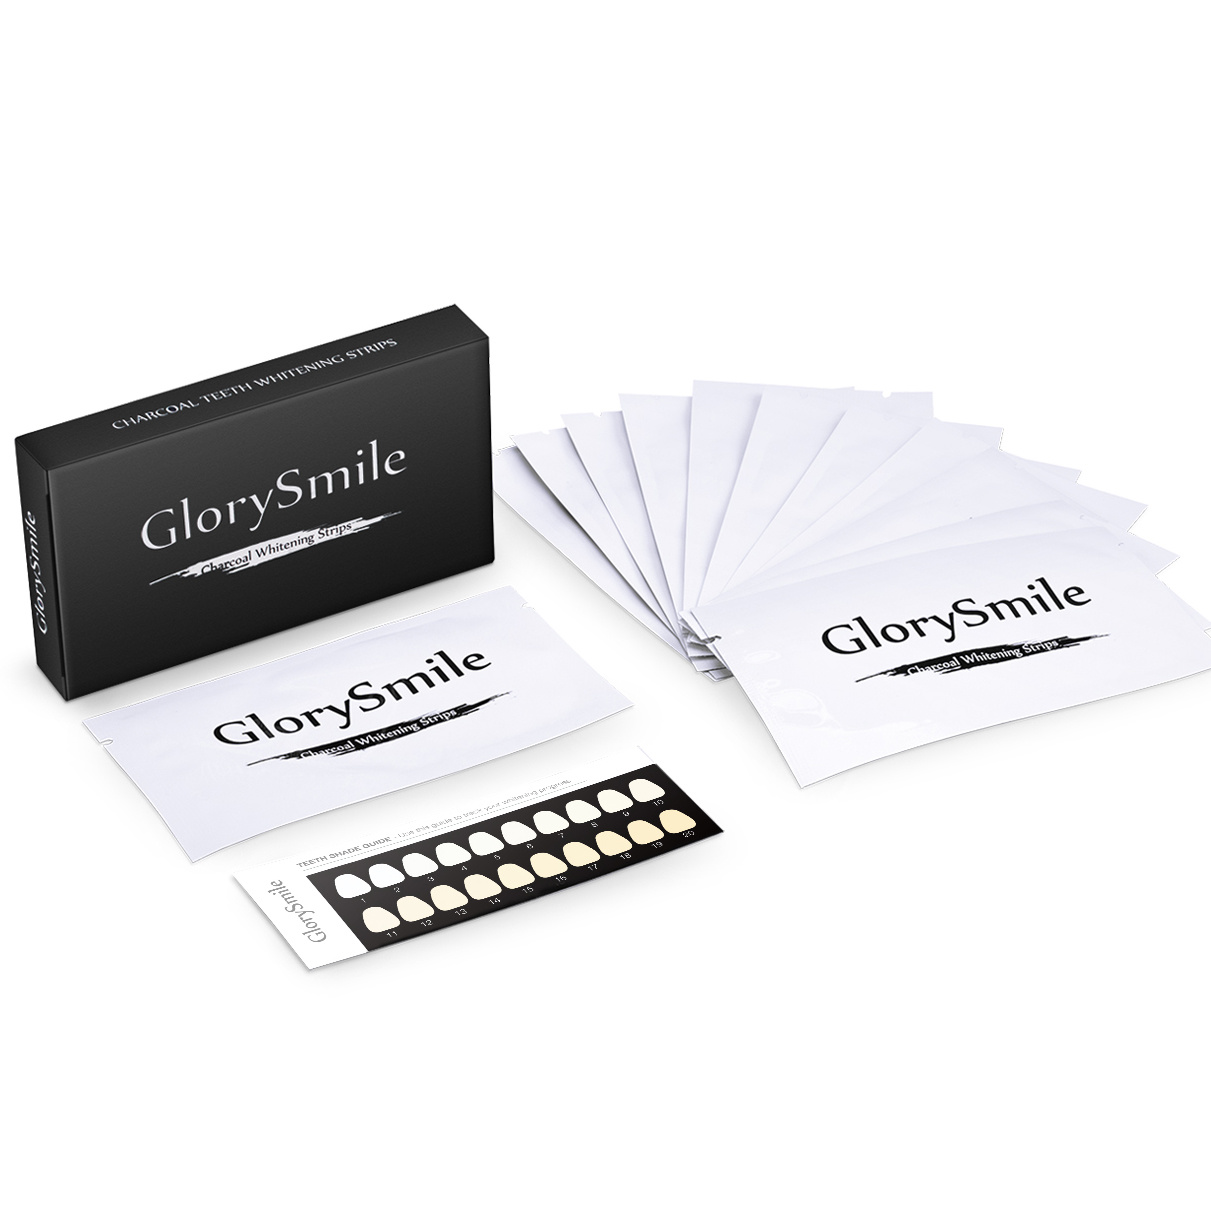 Glorysmile Activated Charcoal Teeth Whitening Strips